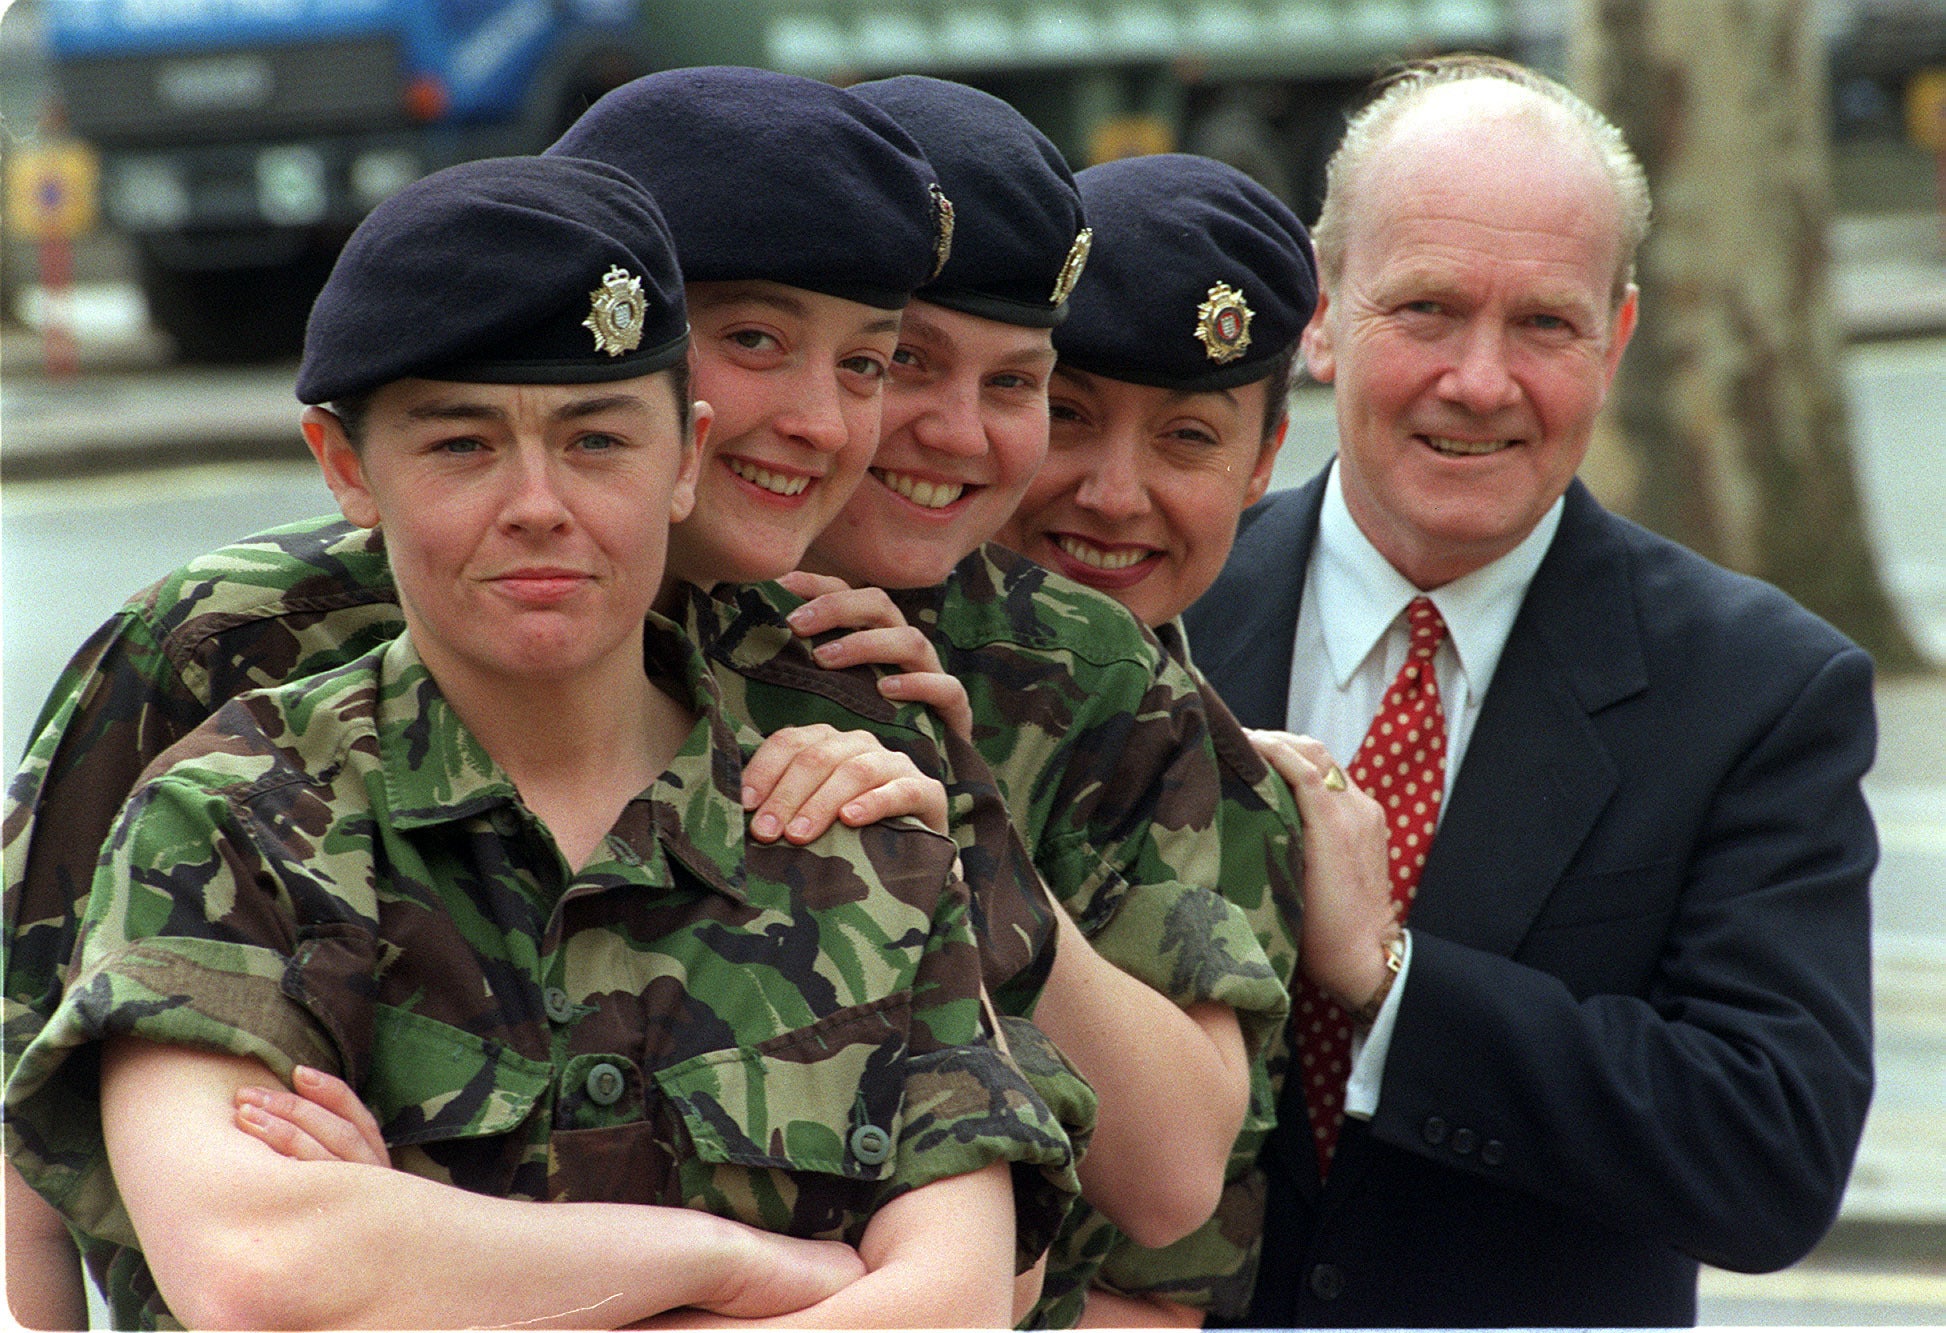 John Reid (right) during a photocall to launch a 2.5 million recruitment drive to encourage more women and members of the ethnic minorities to join the Army.